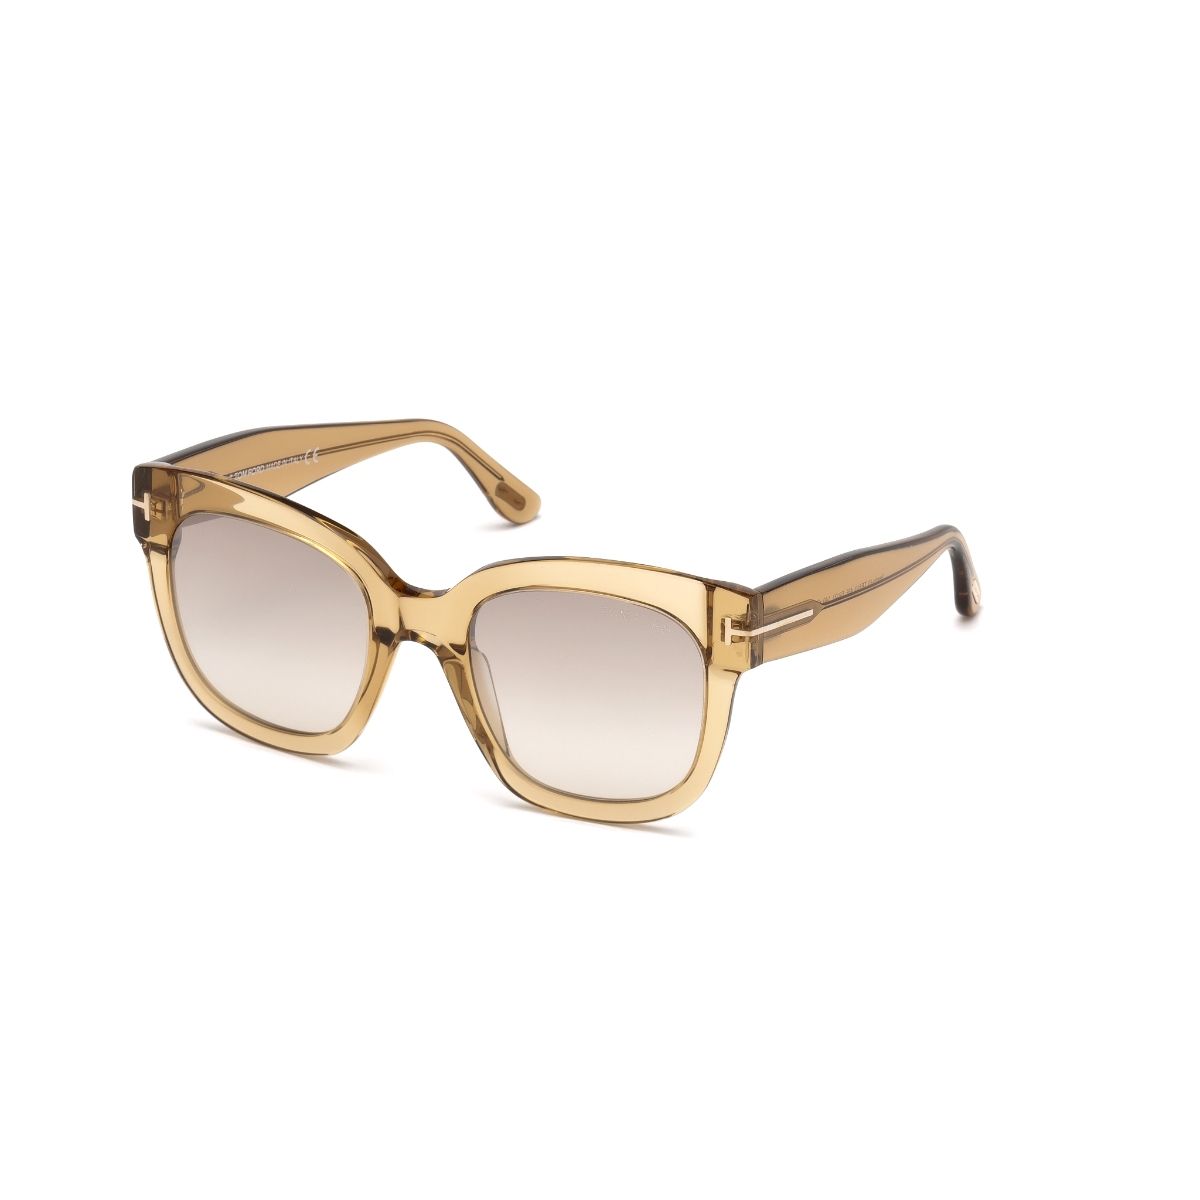 Tom Ford FT0613 52 45f Iconic Oversized Shapes In Premium Acetate  Sunglasses: Buy Tom Ford FT0613 52 45f Iconic Oversized Shapes In Premium  Acetate Sunglasses Online at Best Price in India | Nykaa